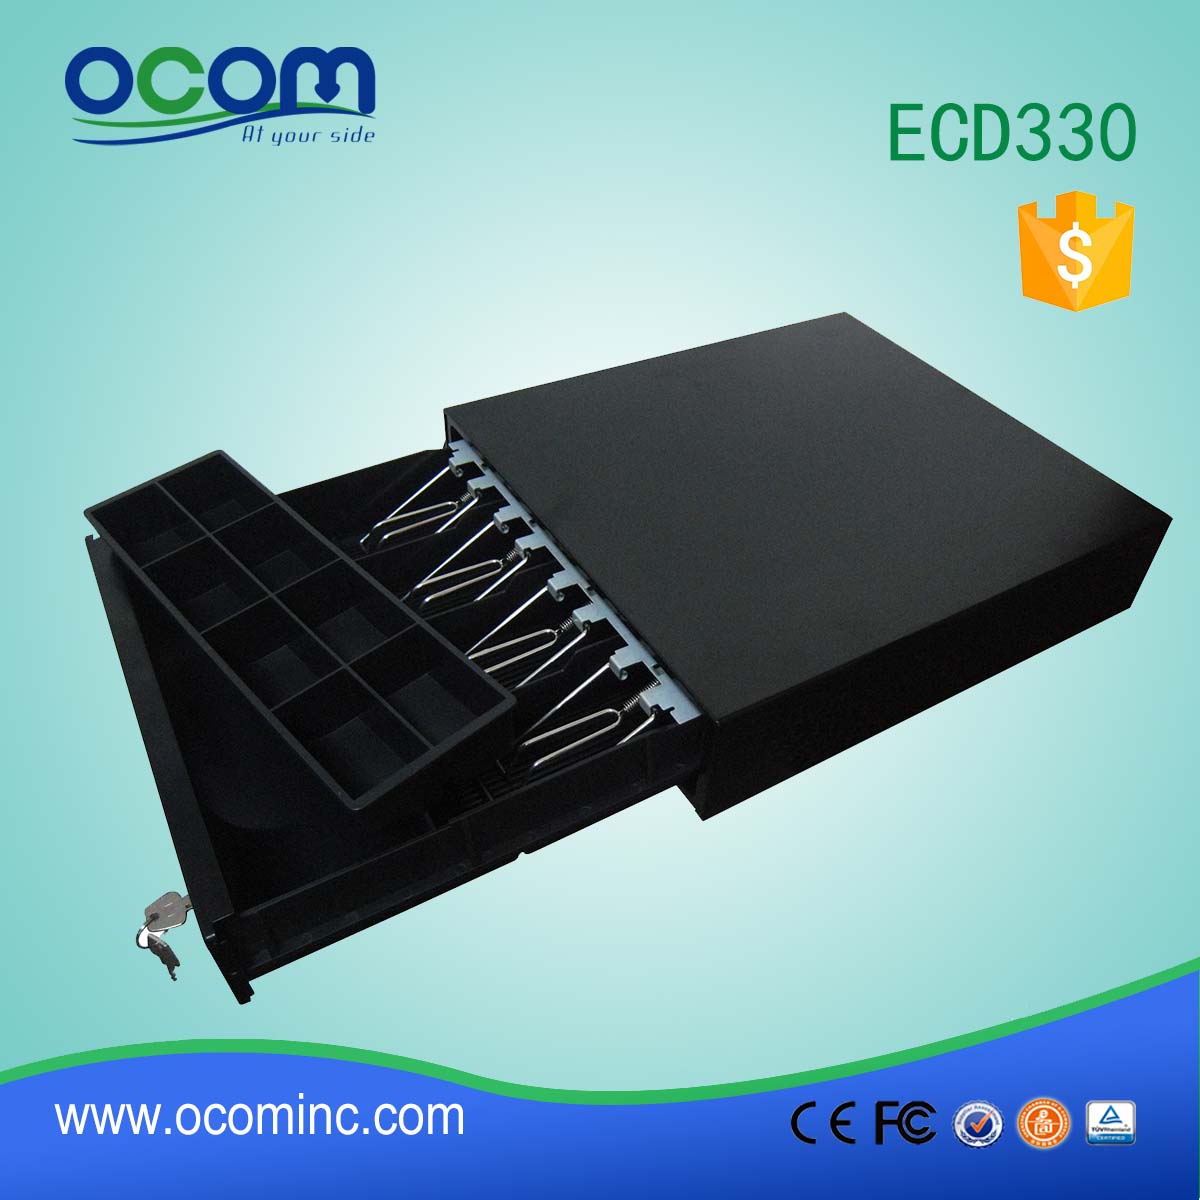 ECD330 Small Metal Cash Drawer 4 adjustable Bill holders and 8 removable Coin holders